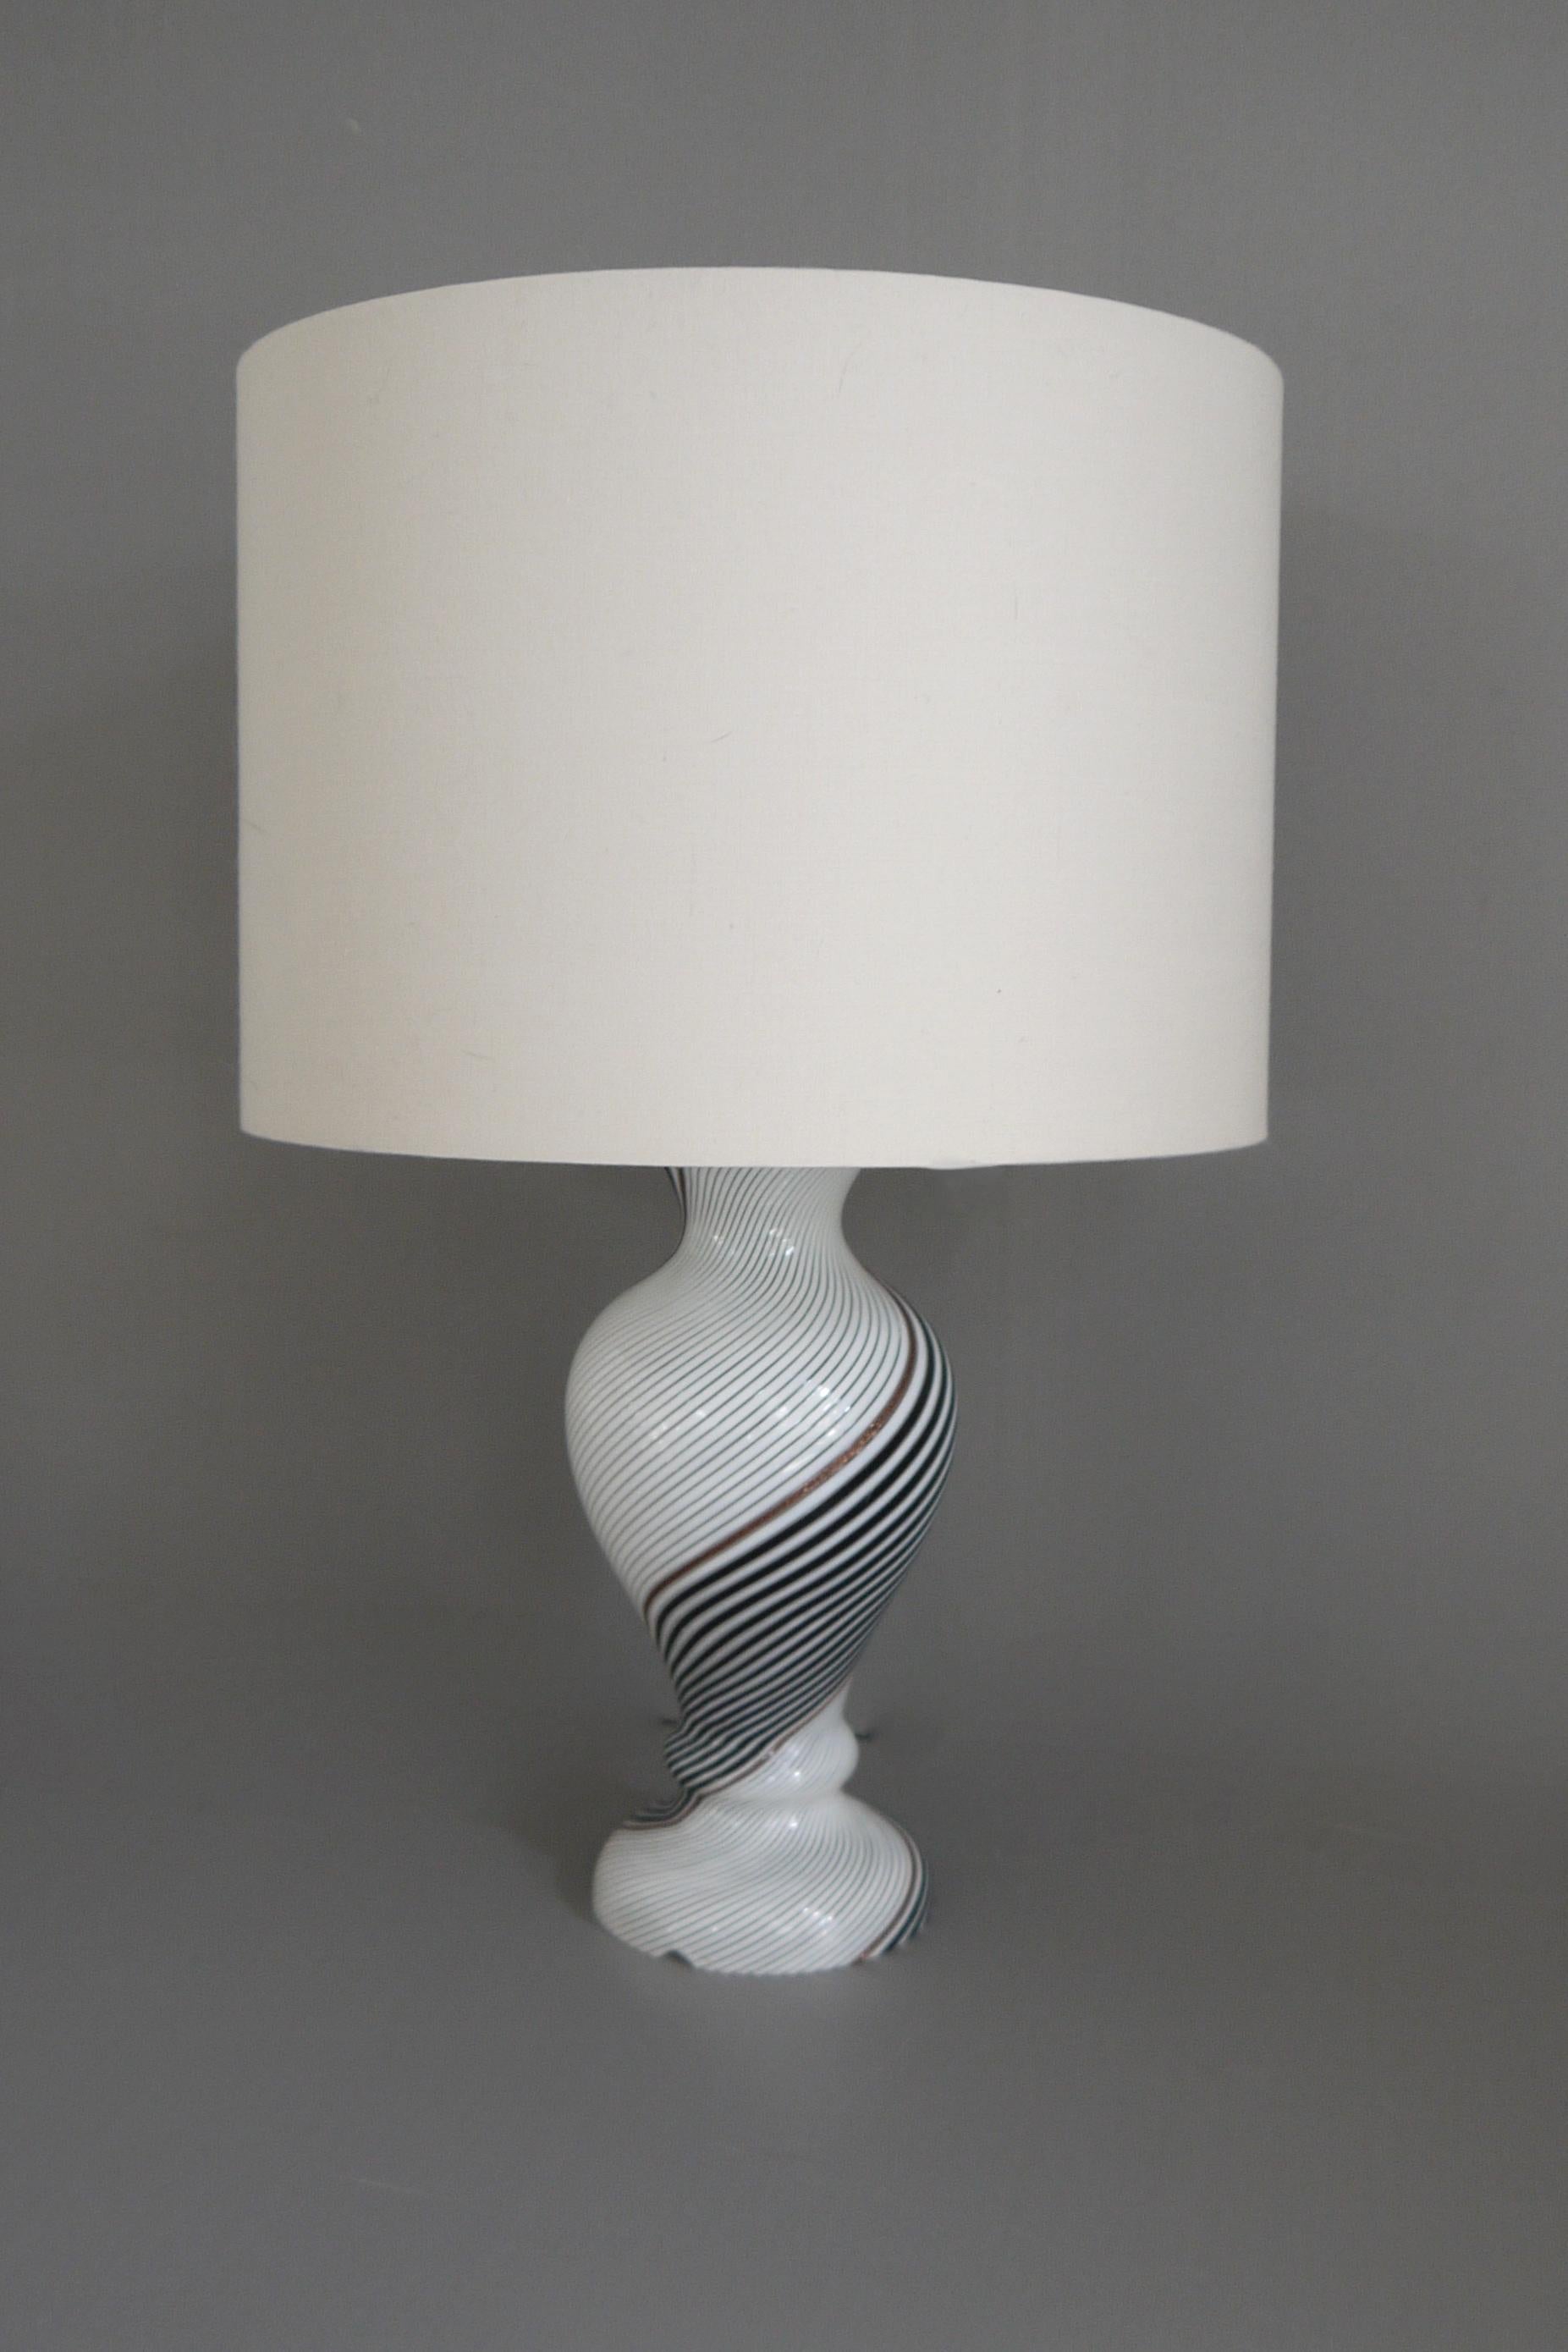 A Dino Martens Mezza Filigrana lamp base for Aureliano Toso, 1957. Made using the Bianca Nera technique blown white and black mezza filigrana with flashes of aventurine. Produced in 1957 when Martens was working with Aurelian Toso. There is a cable